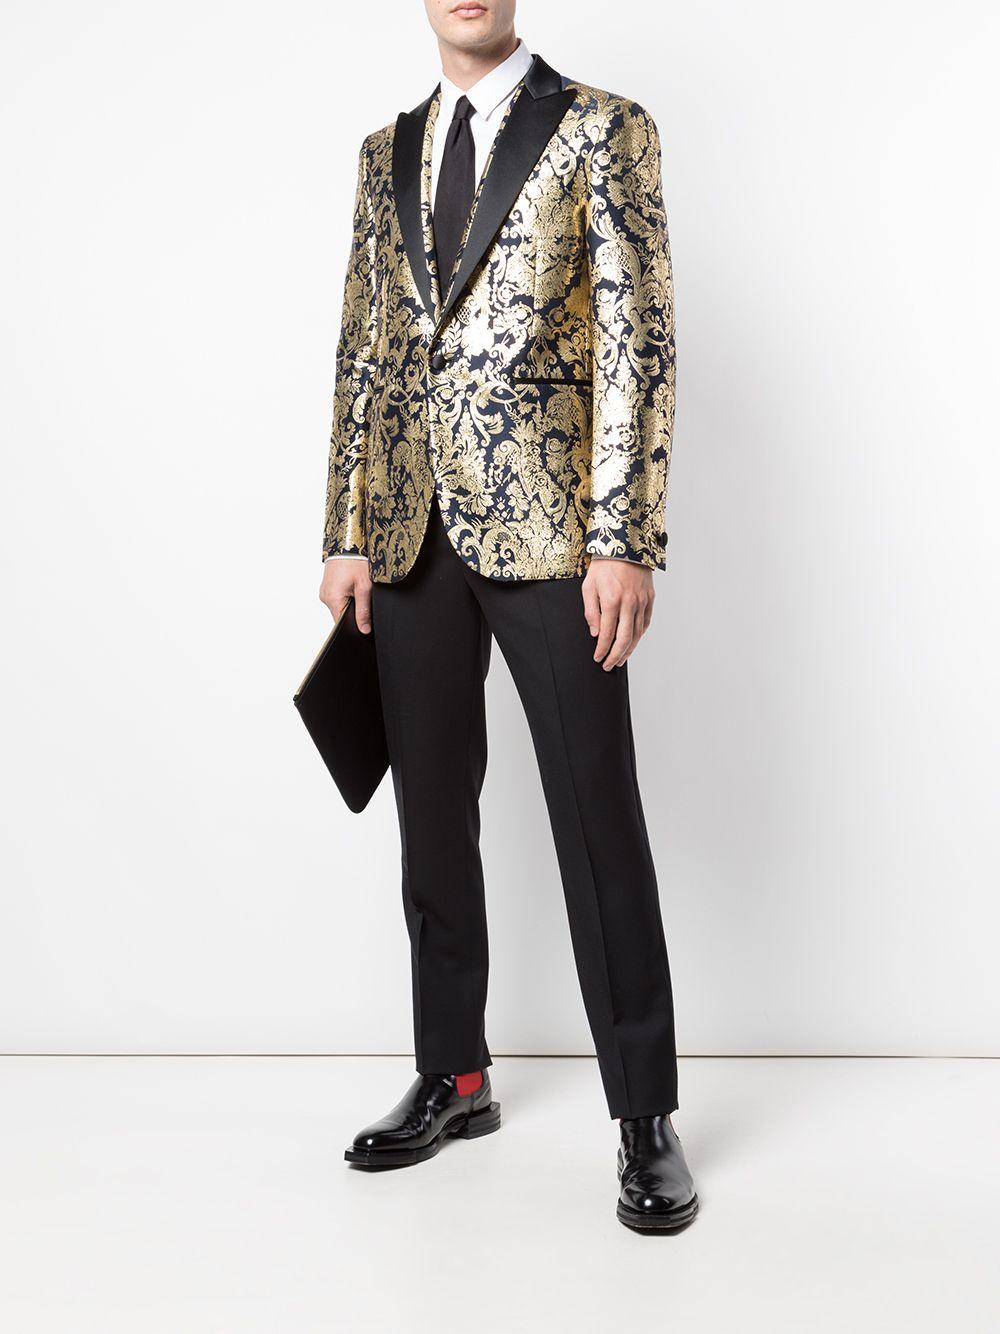 Versace Mens Navy Gold Metallic Barocco Brocade Blazer/ Dinner Jacket

Channel your inner extrovert in this Barocco brocade blazer from Versace. Made from a silk-cotton blend, this stand-out piece has been designed with satin peaked lapels and is